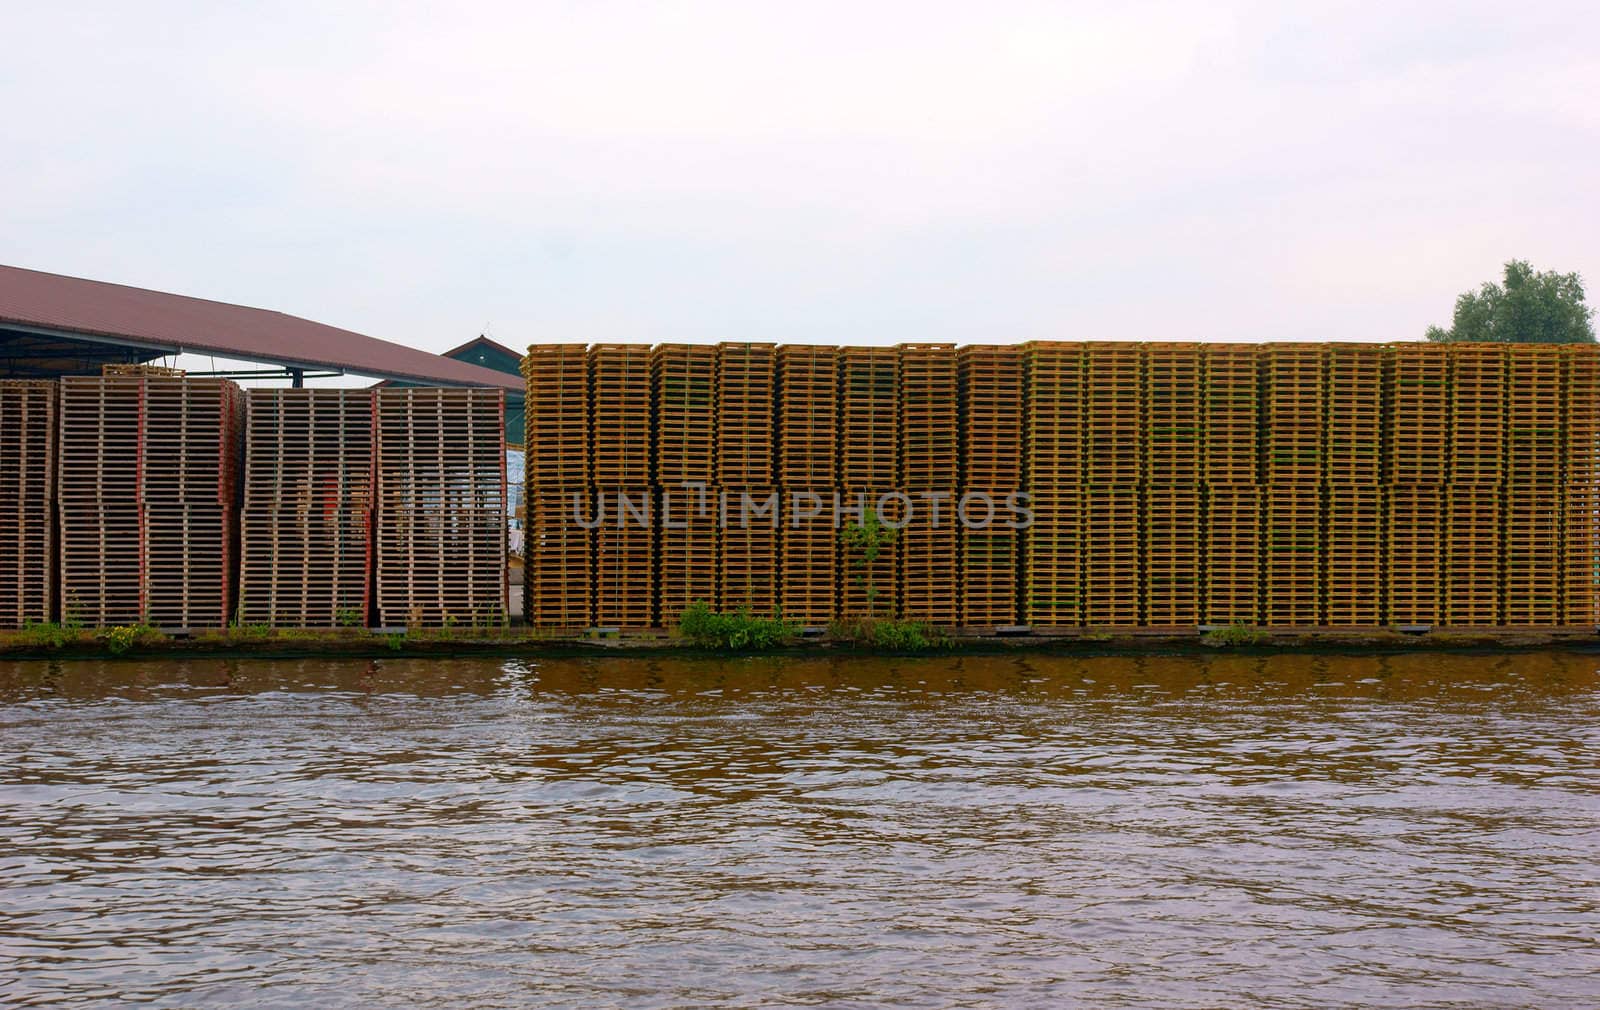 A wall built with wooden pallets